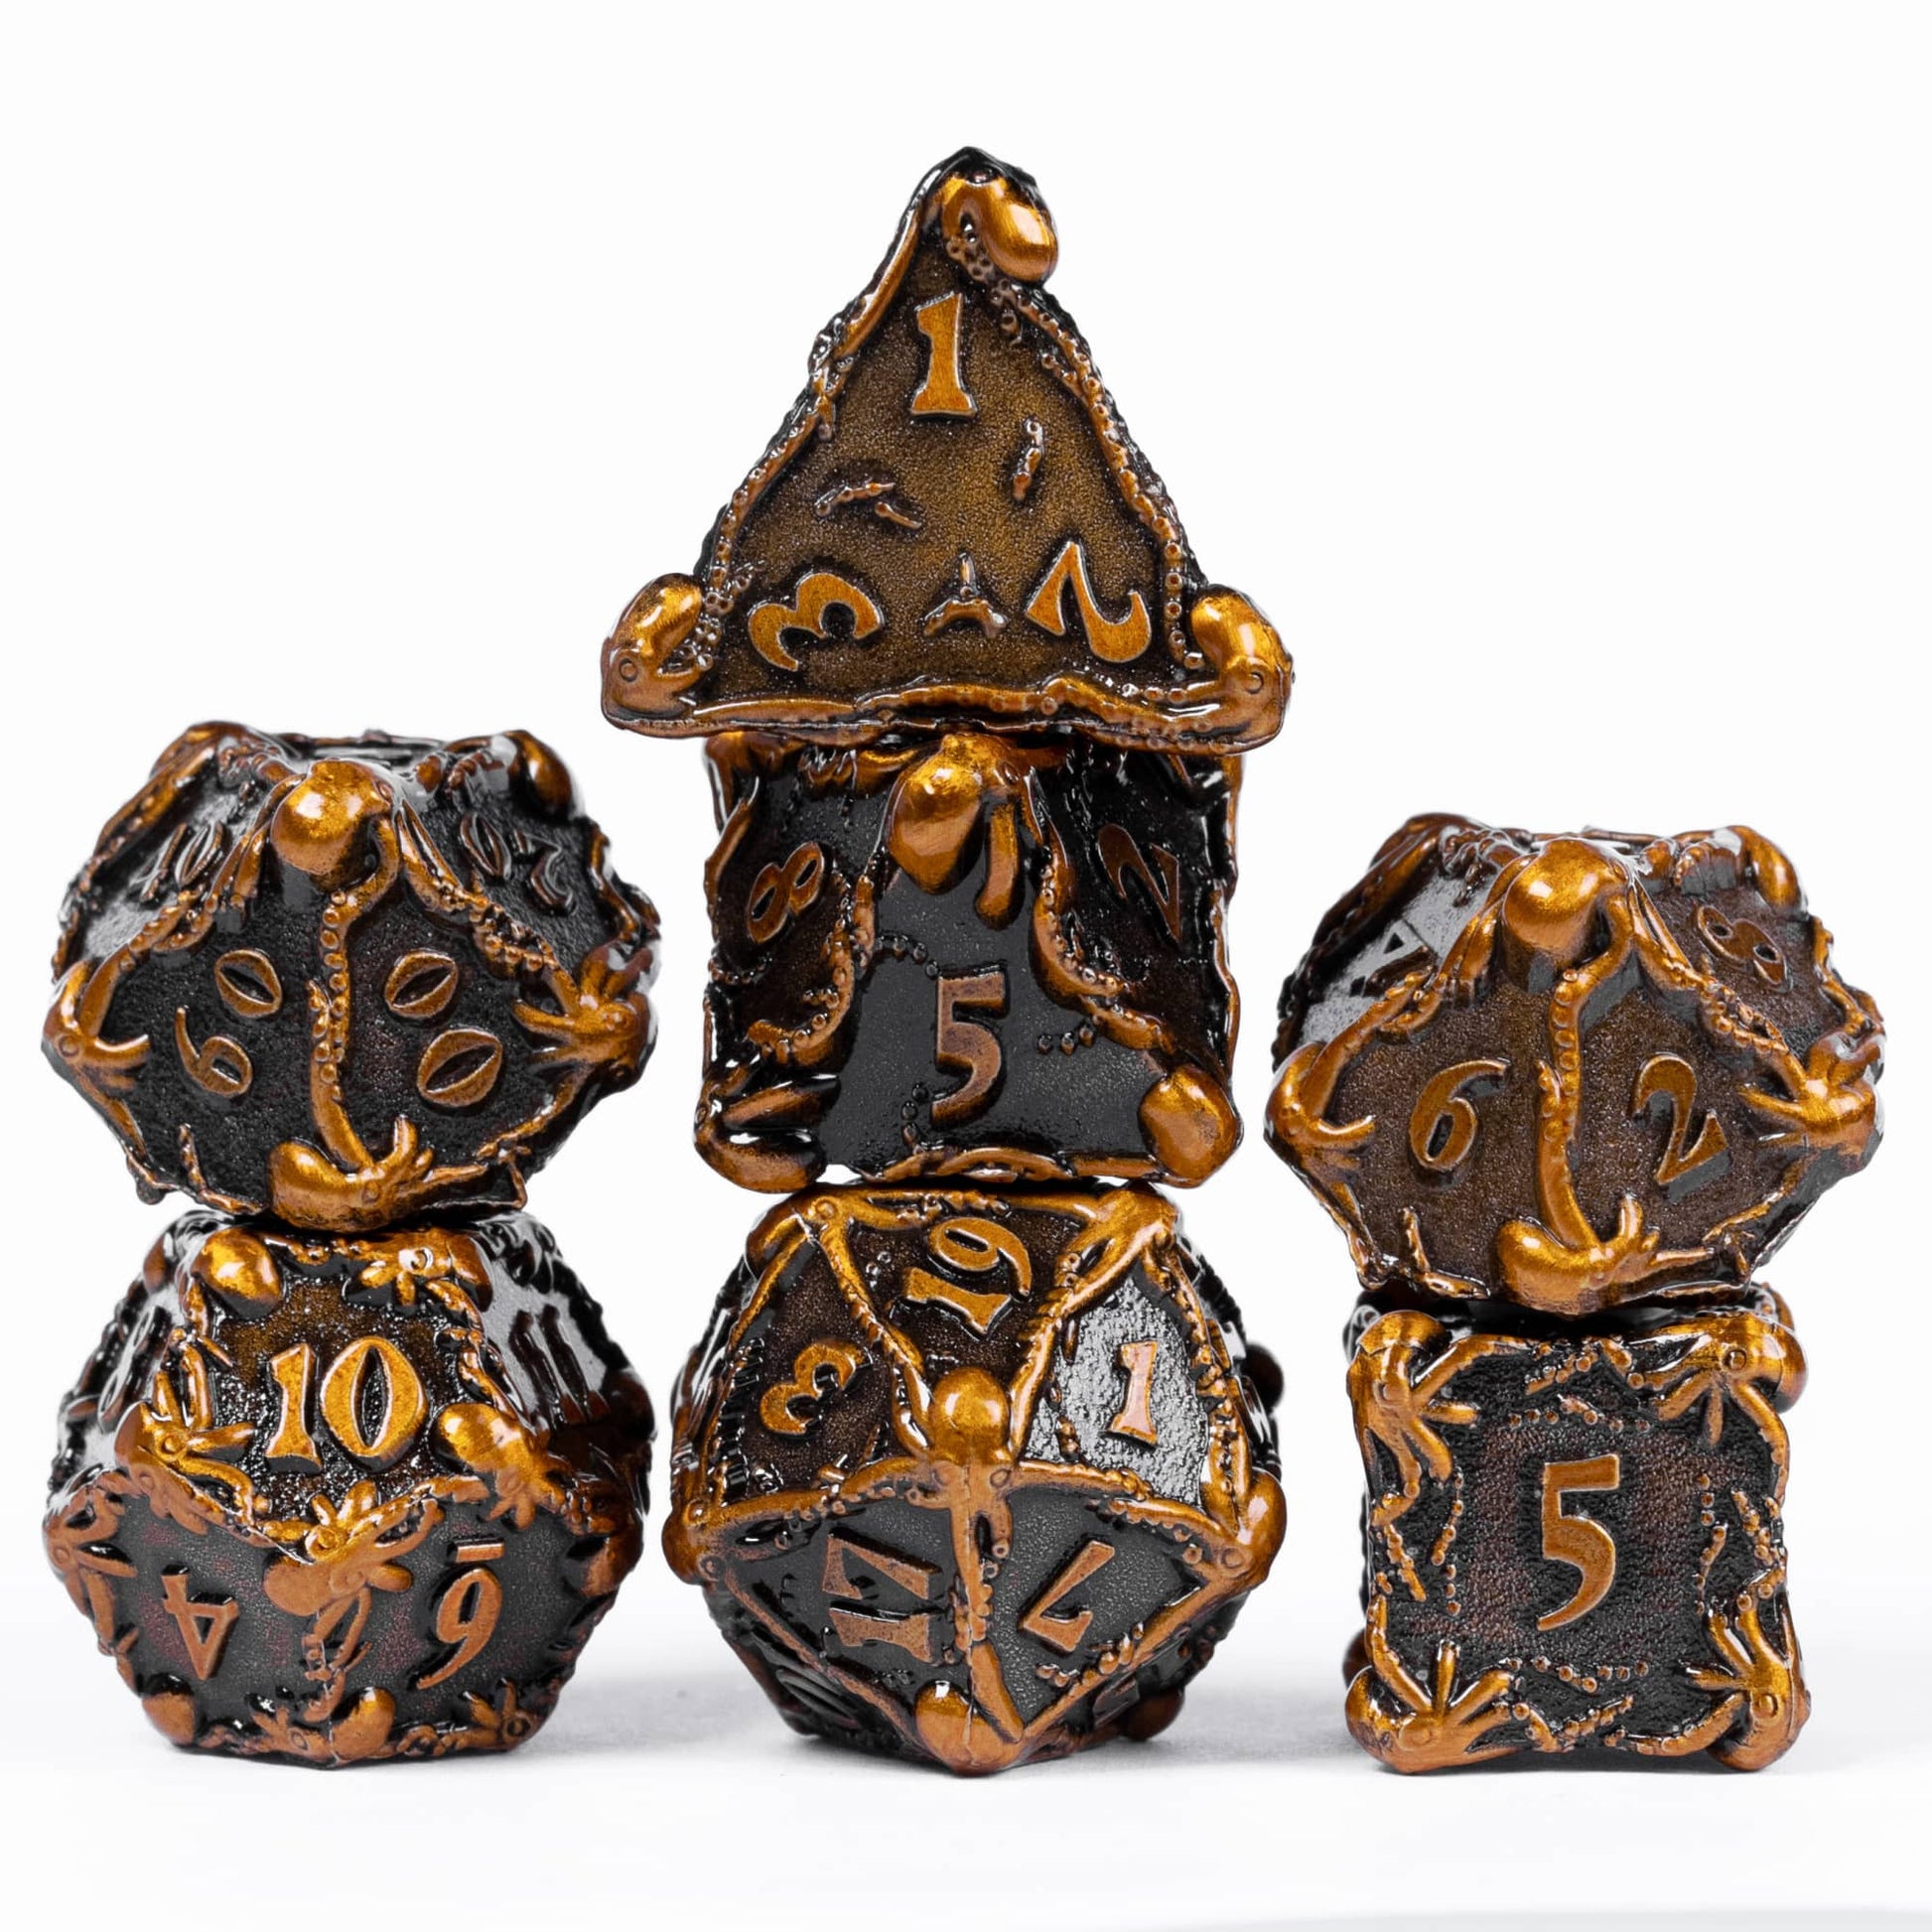 Full 7 piece gold colored octopus metal dice set